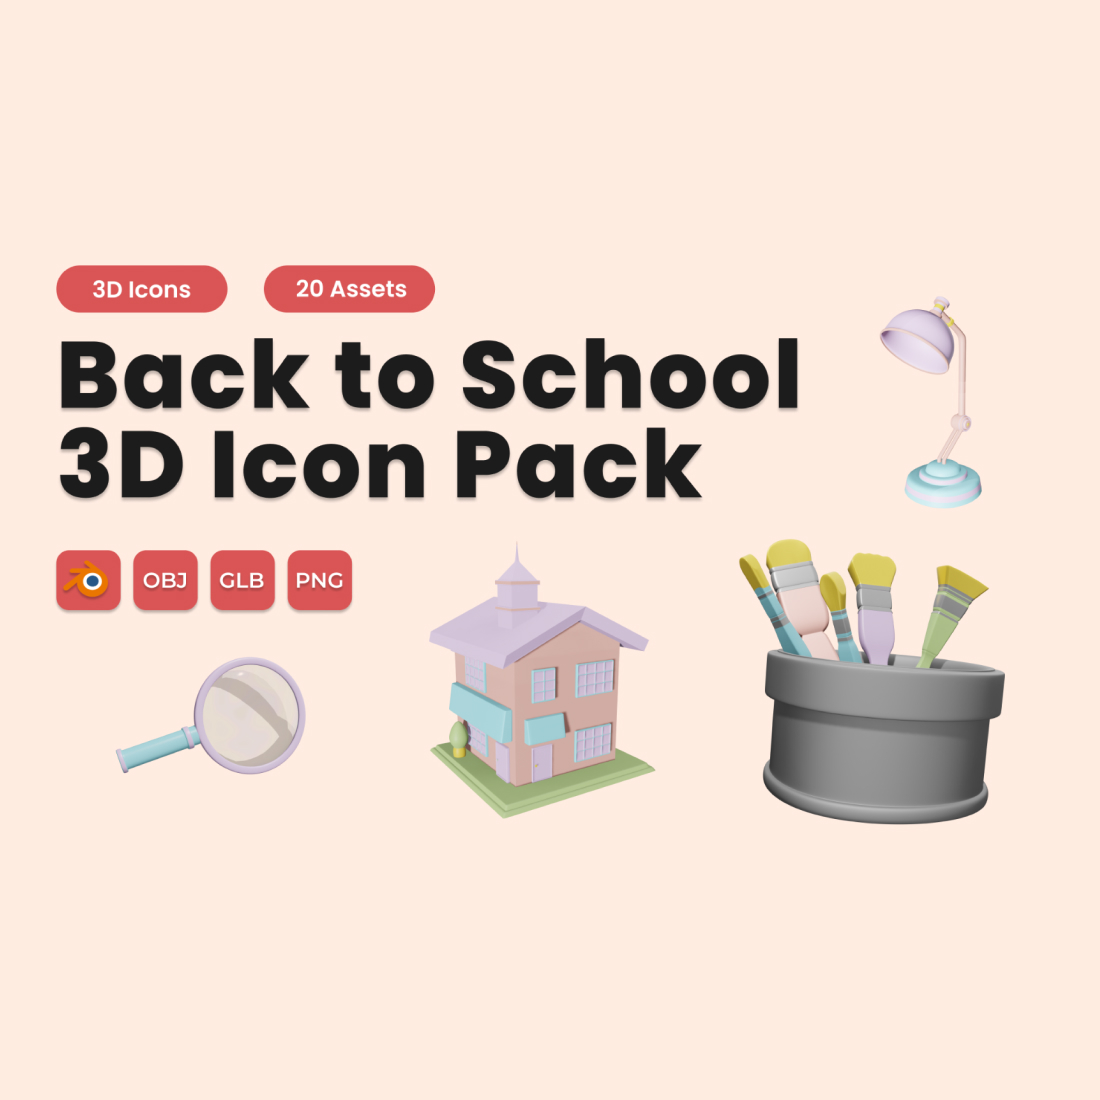 Back to School 3D Icon Pack Vol 2 cover image.